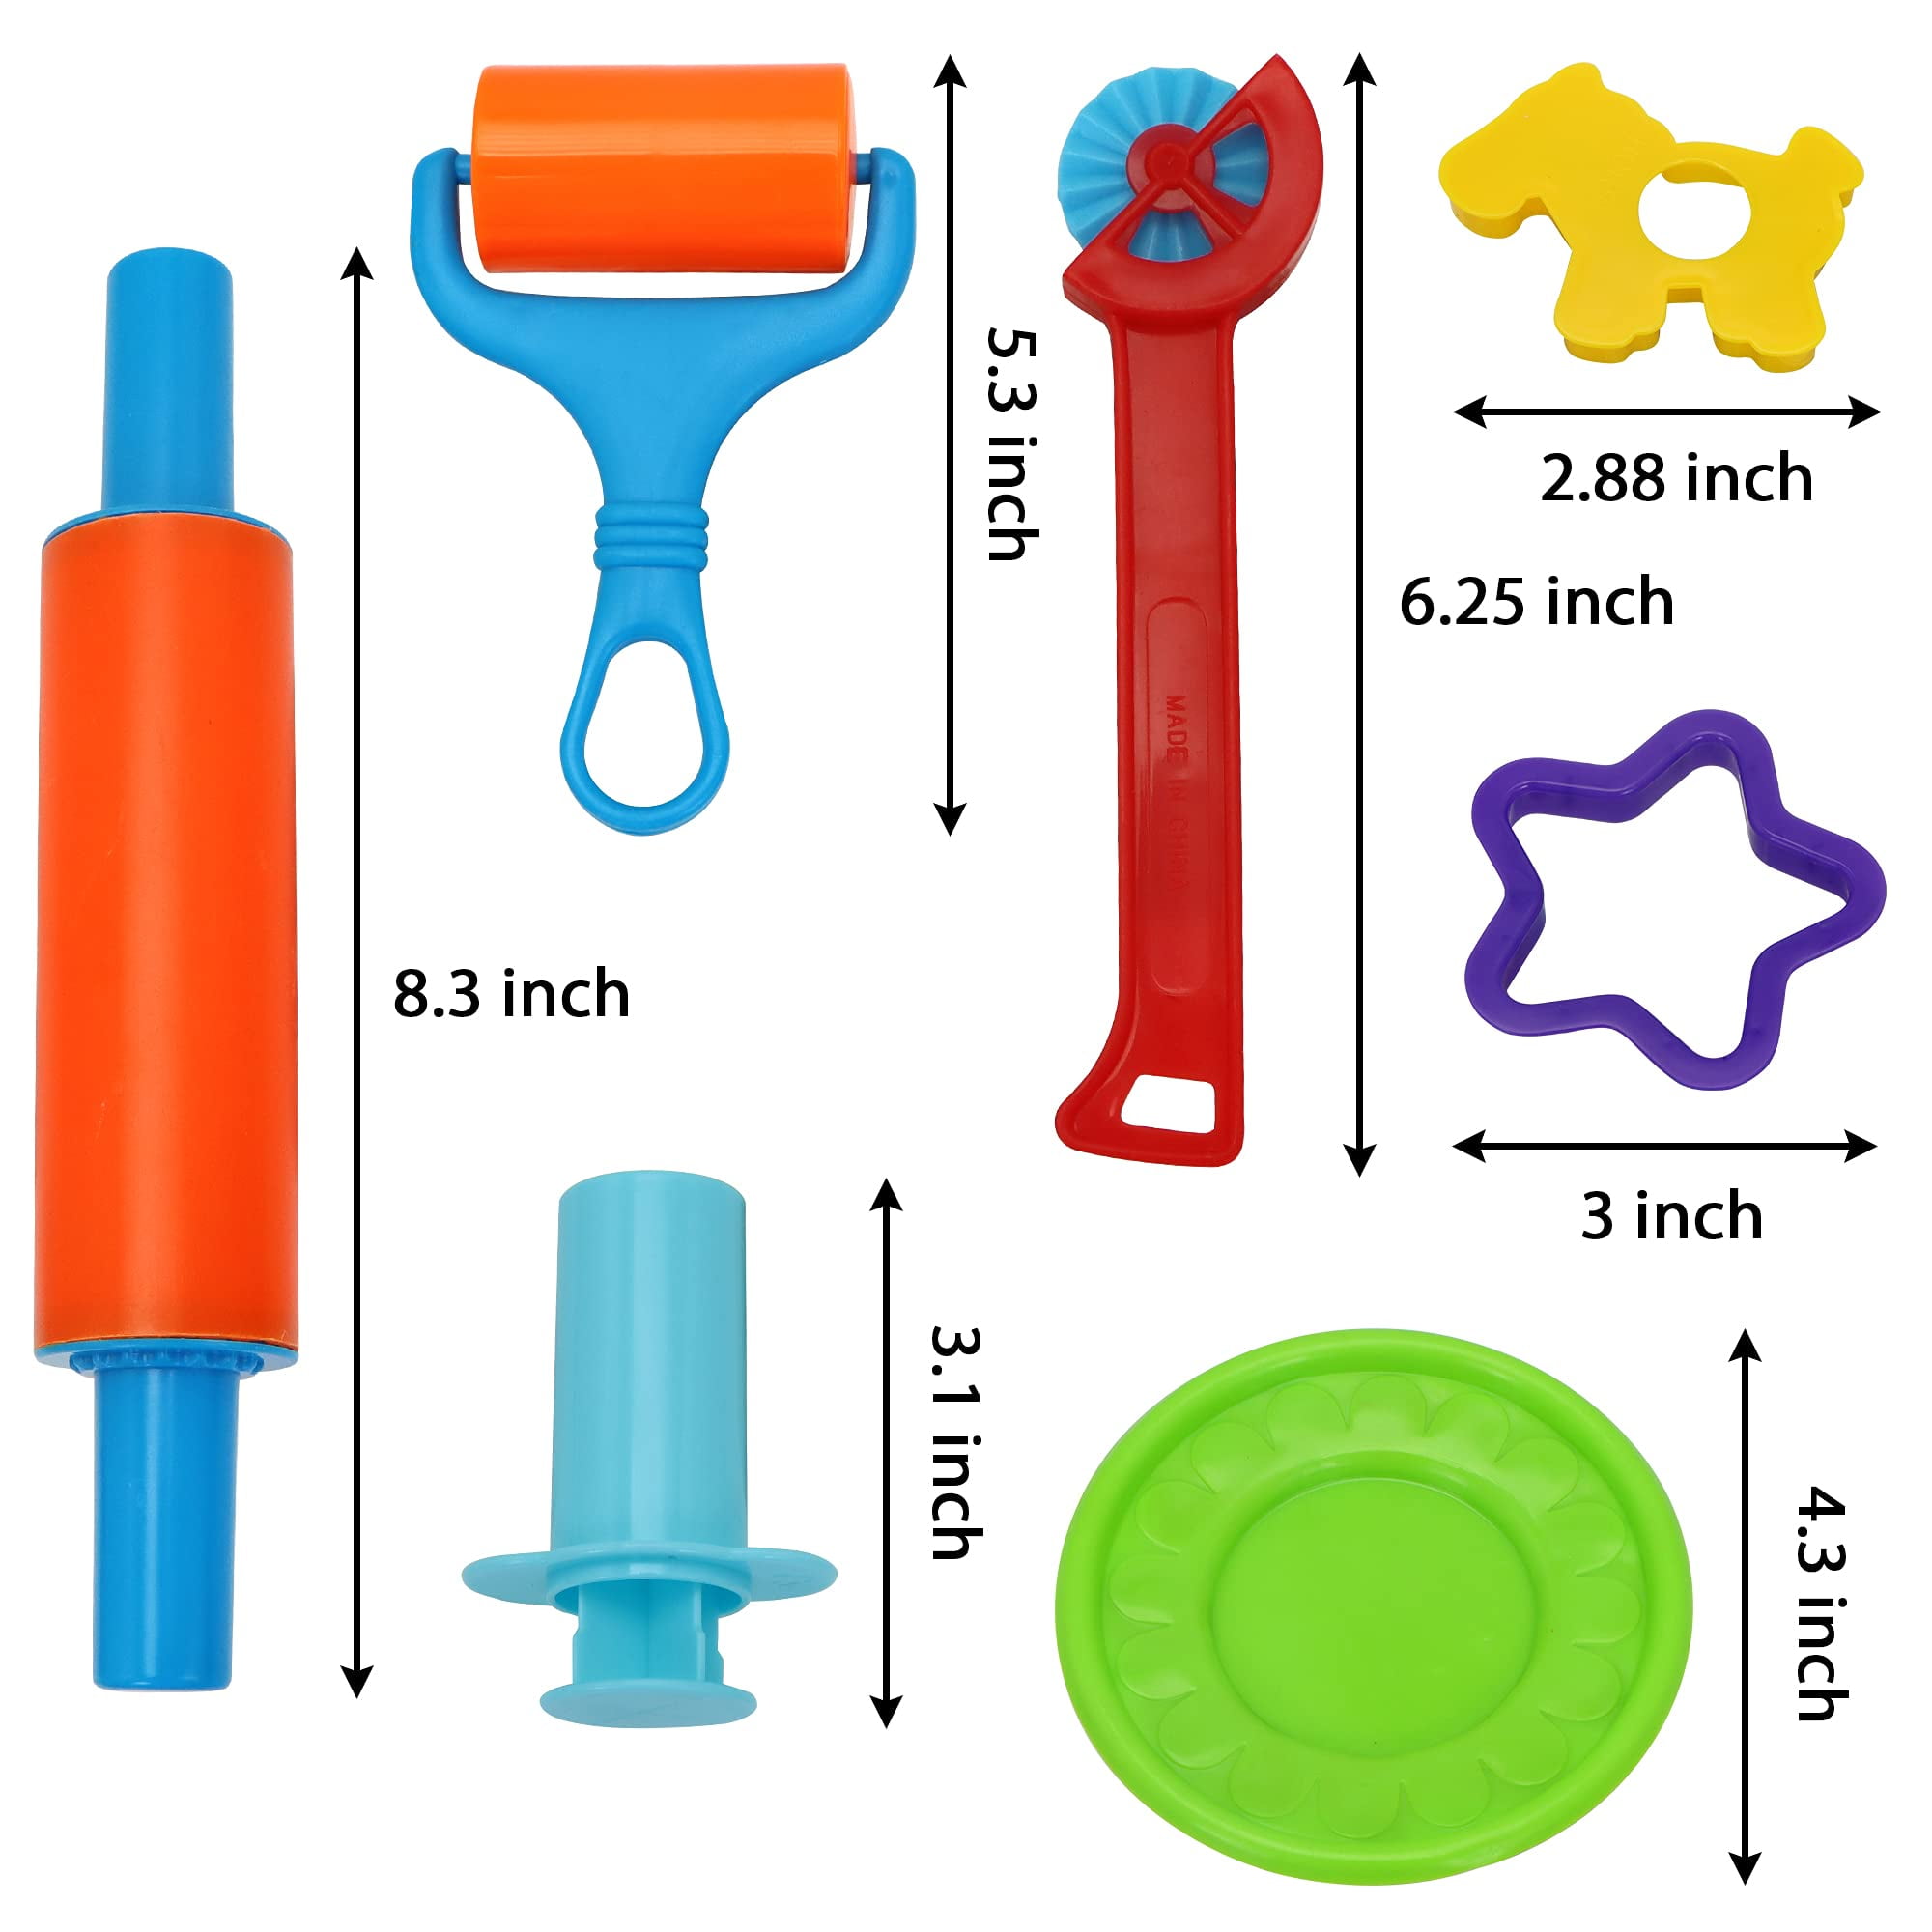 44 Pieces Play Dough Accessories Set Colour Random Set for Kids Playdough  Tools with Various Plastic Molds,Rolling Pins, Cutters( Accessories color  random)